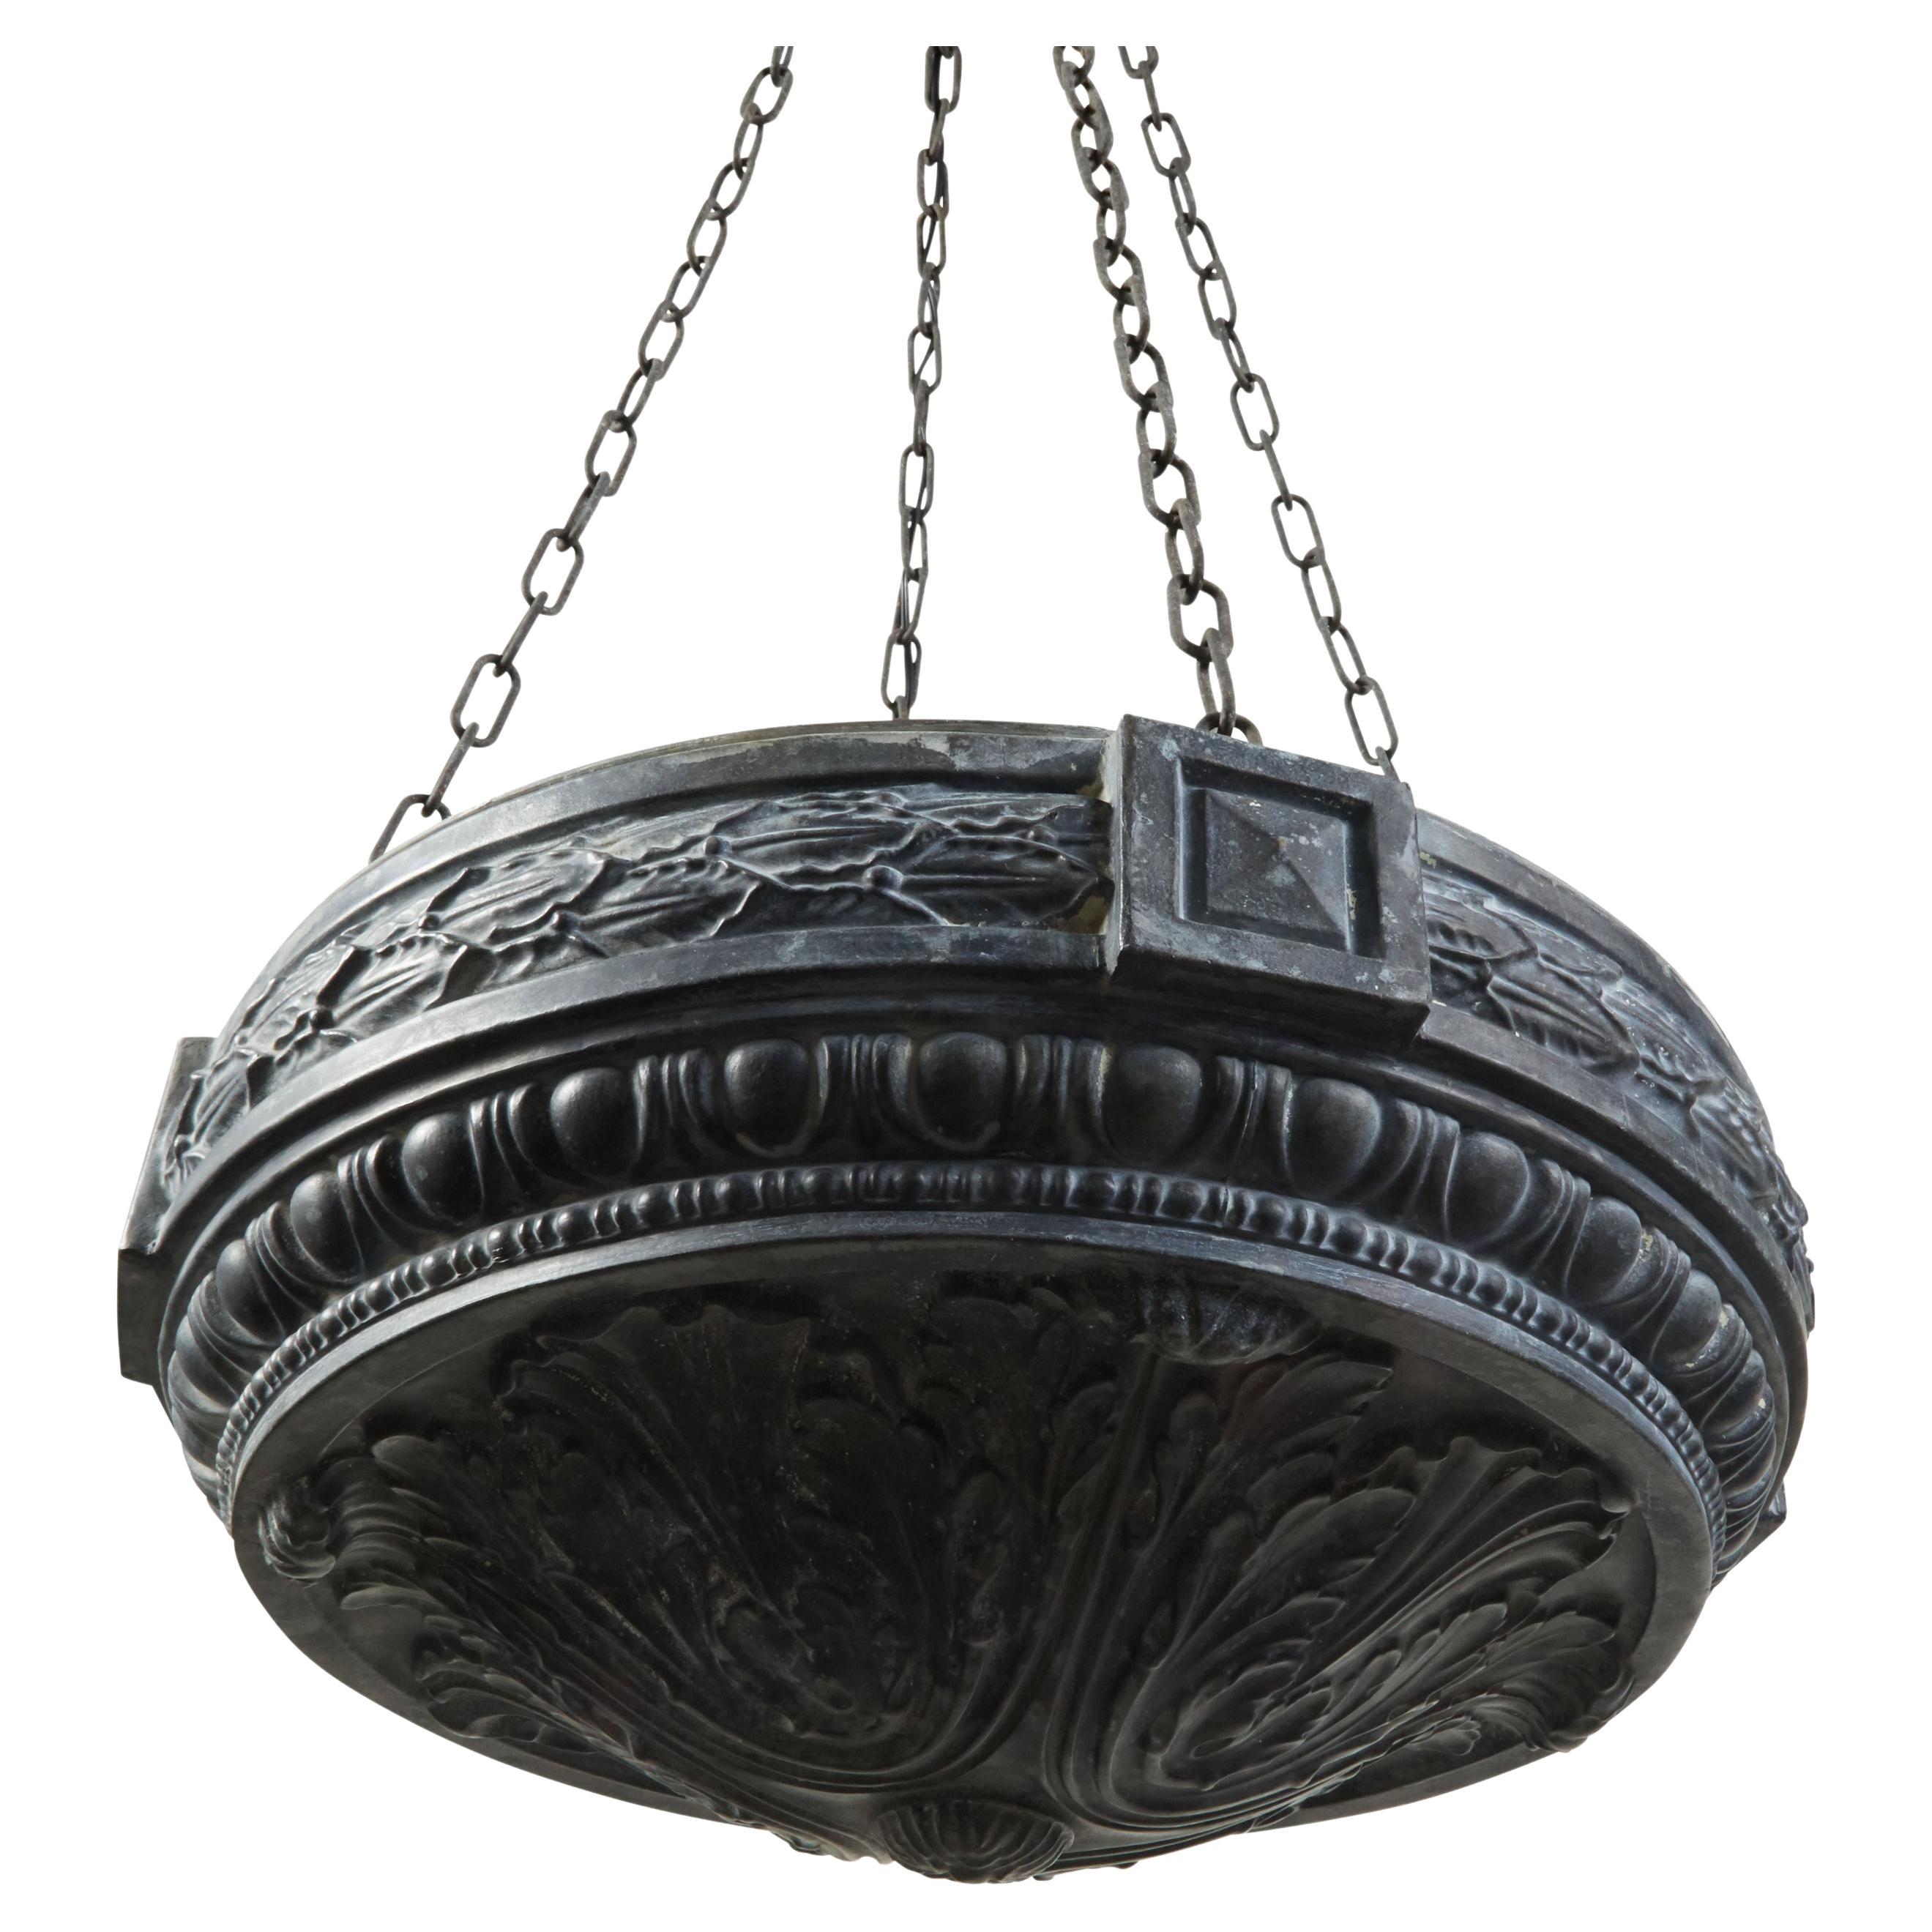 French Midcentury Zinc Light Fixture with Foliage and Egg-and-Dart Motifs For Sale